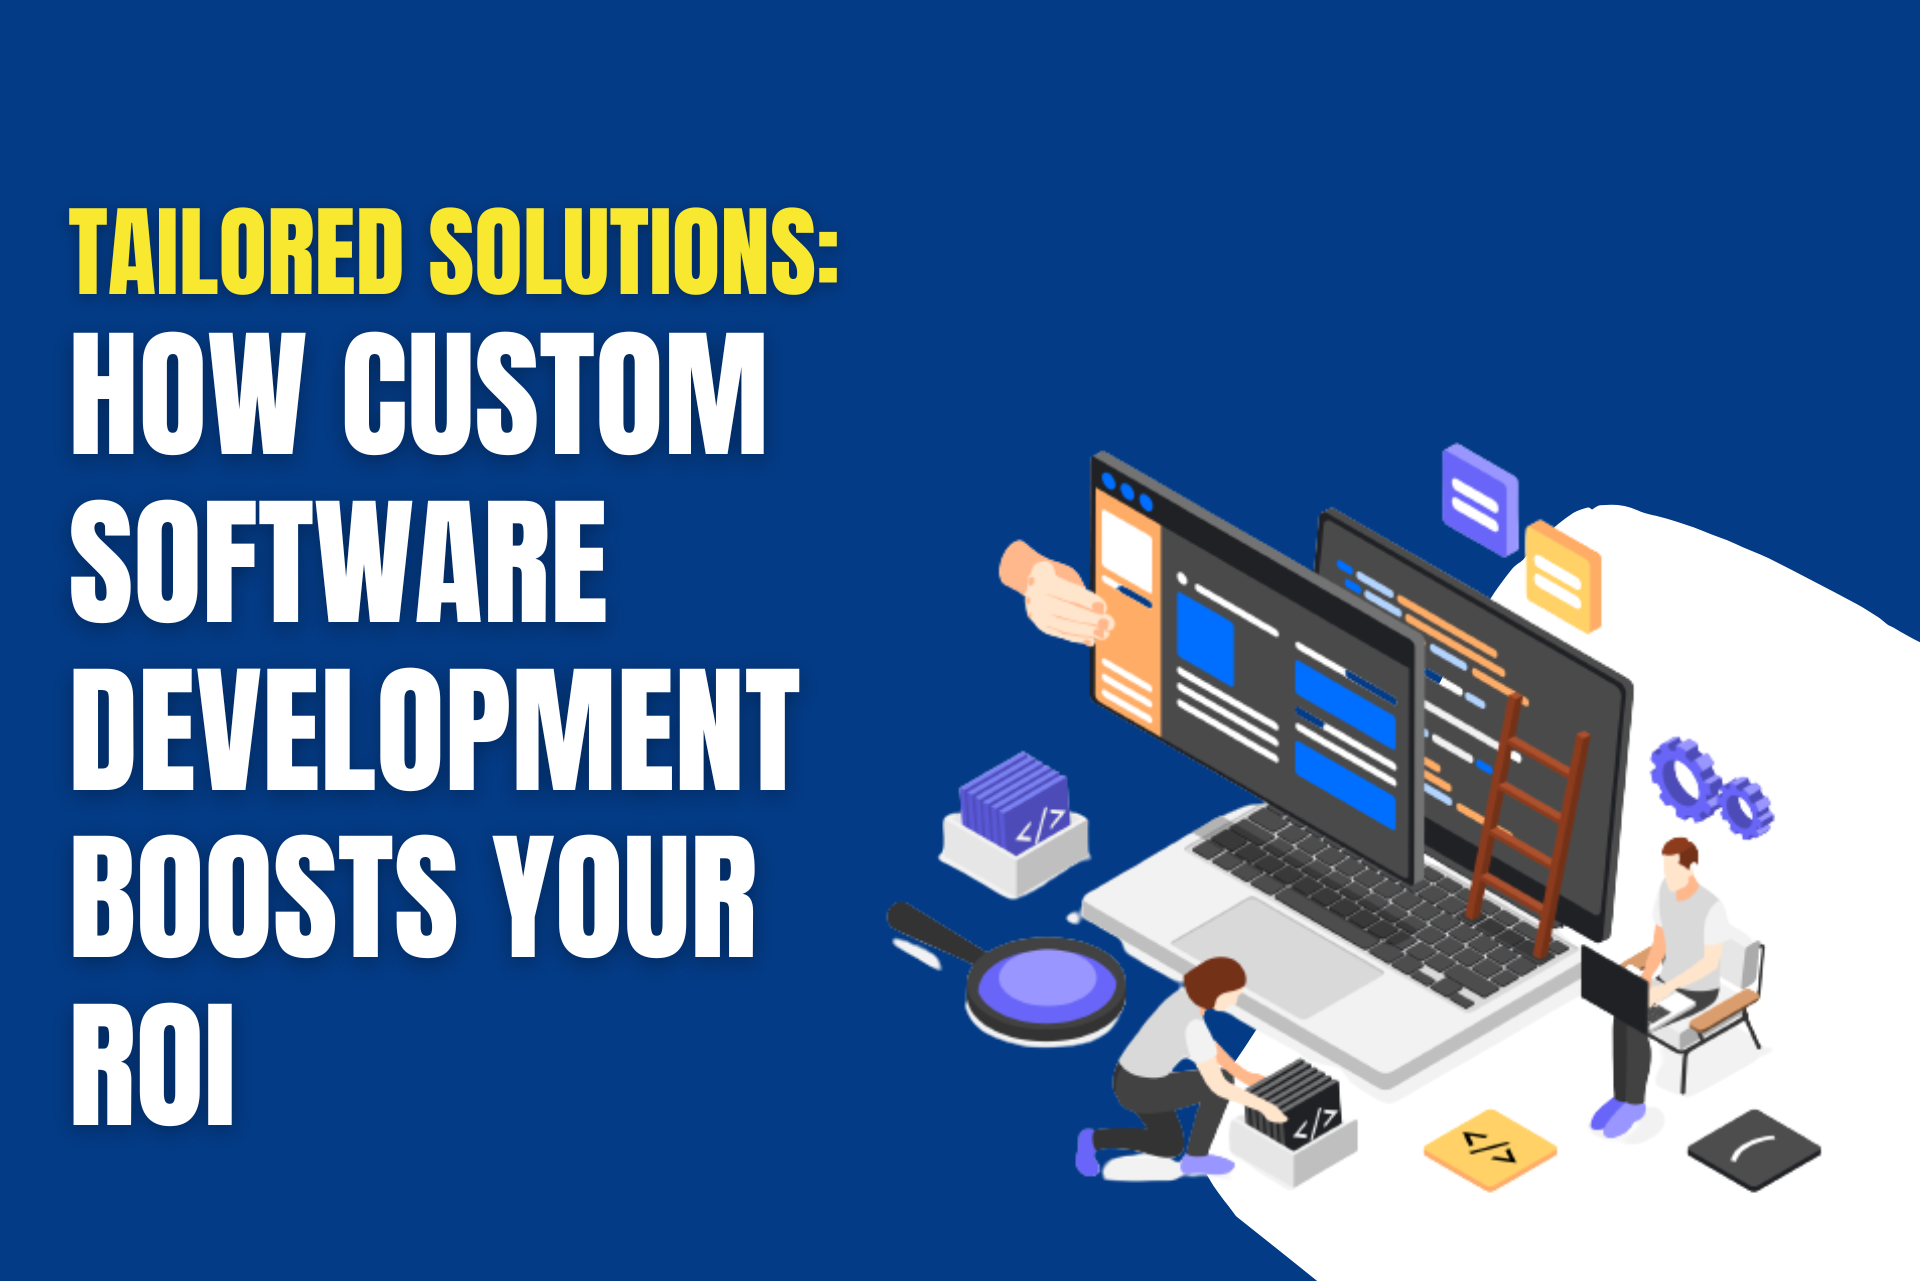 How Custom Software Development Boosts Your ROI